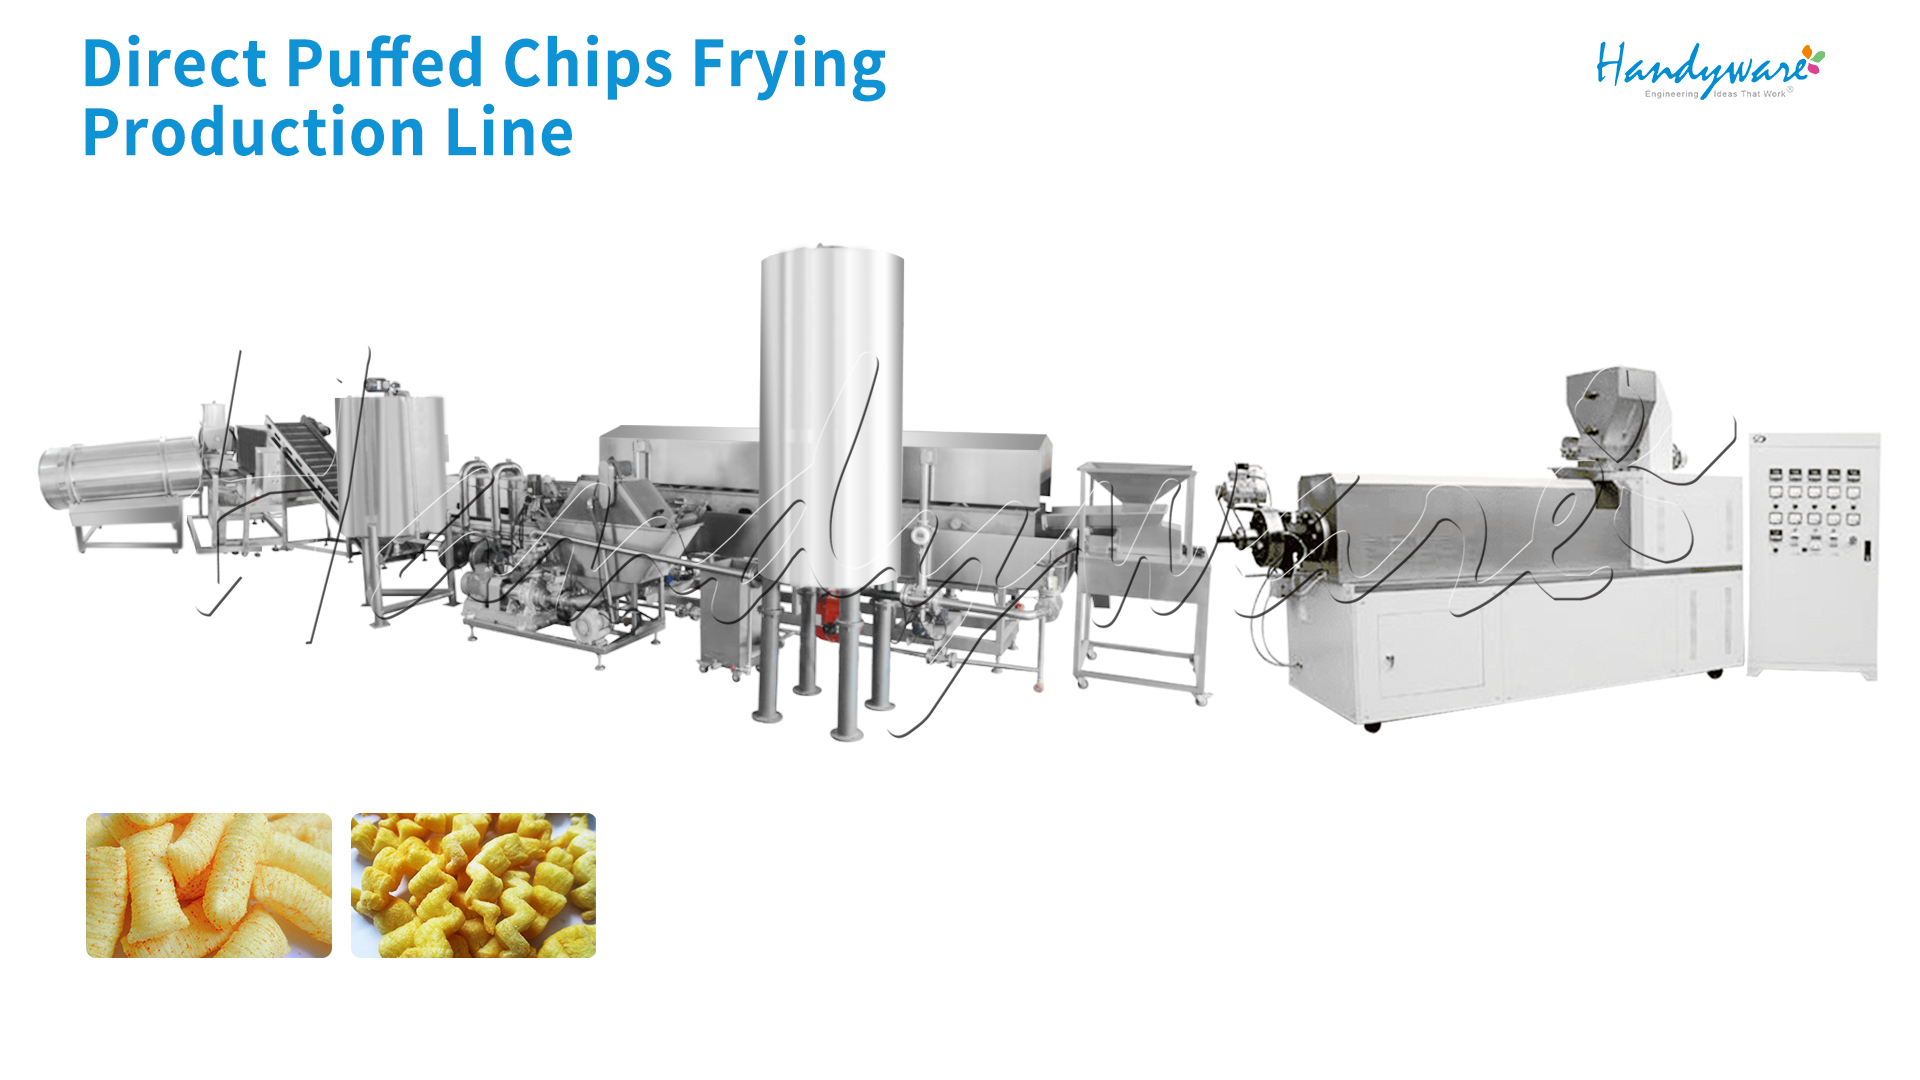 Direct Puffed Chips Frying Production Line